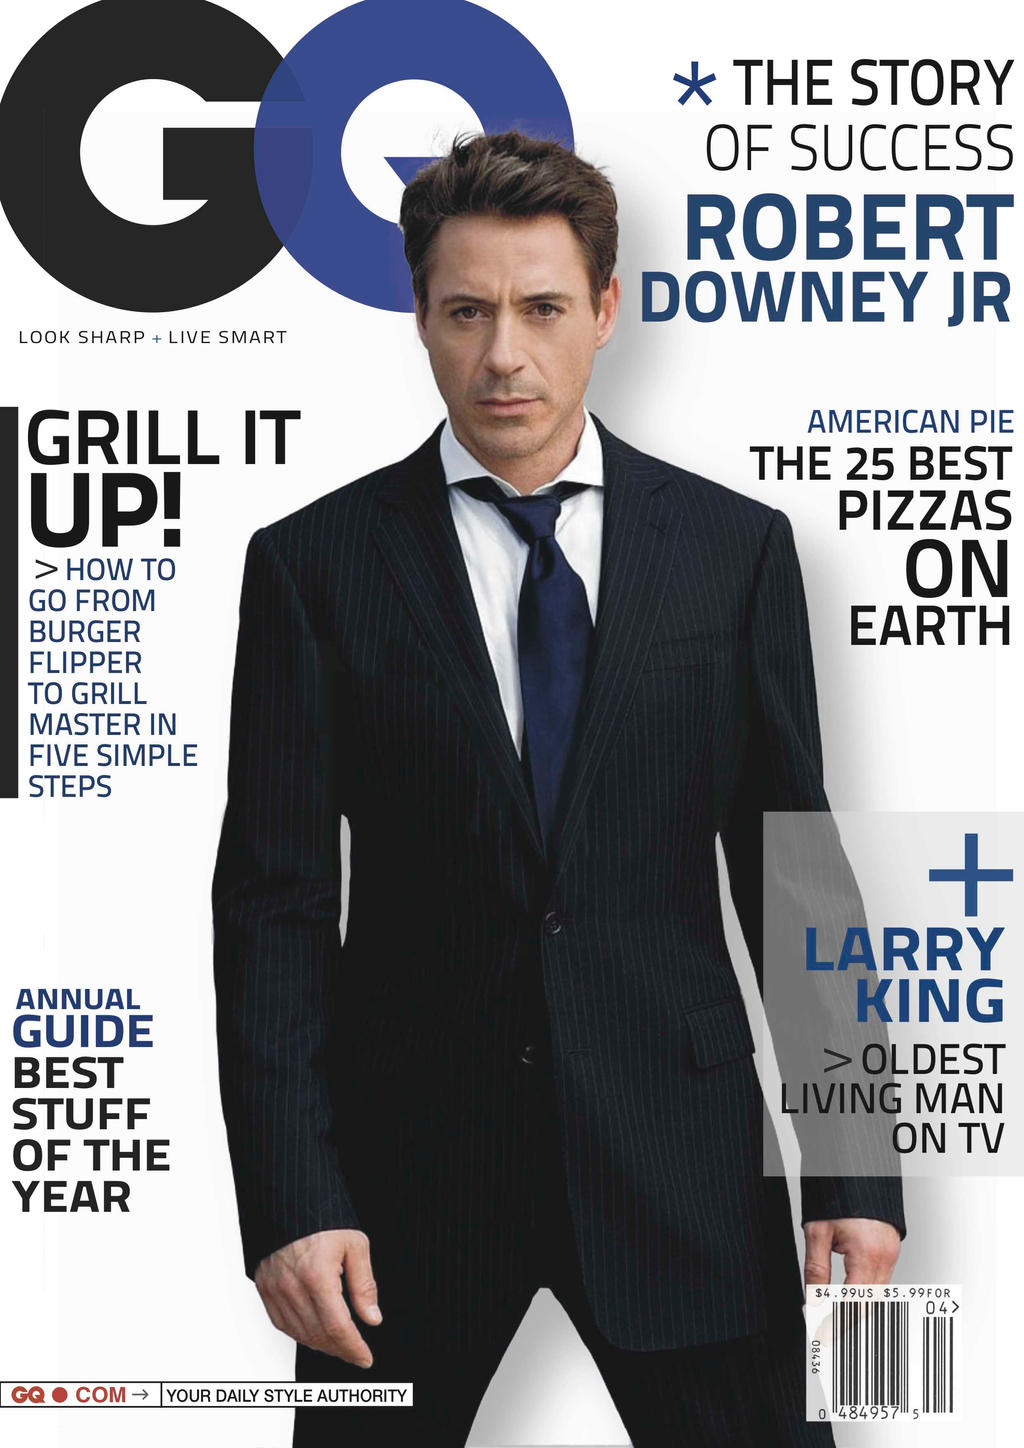 Prototype Magazine cover for GQ by Philuppus on DeviantArt